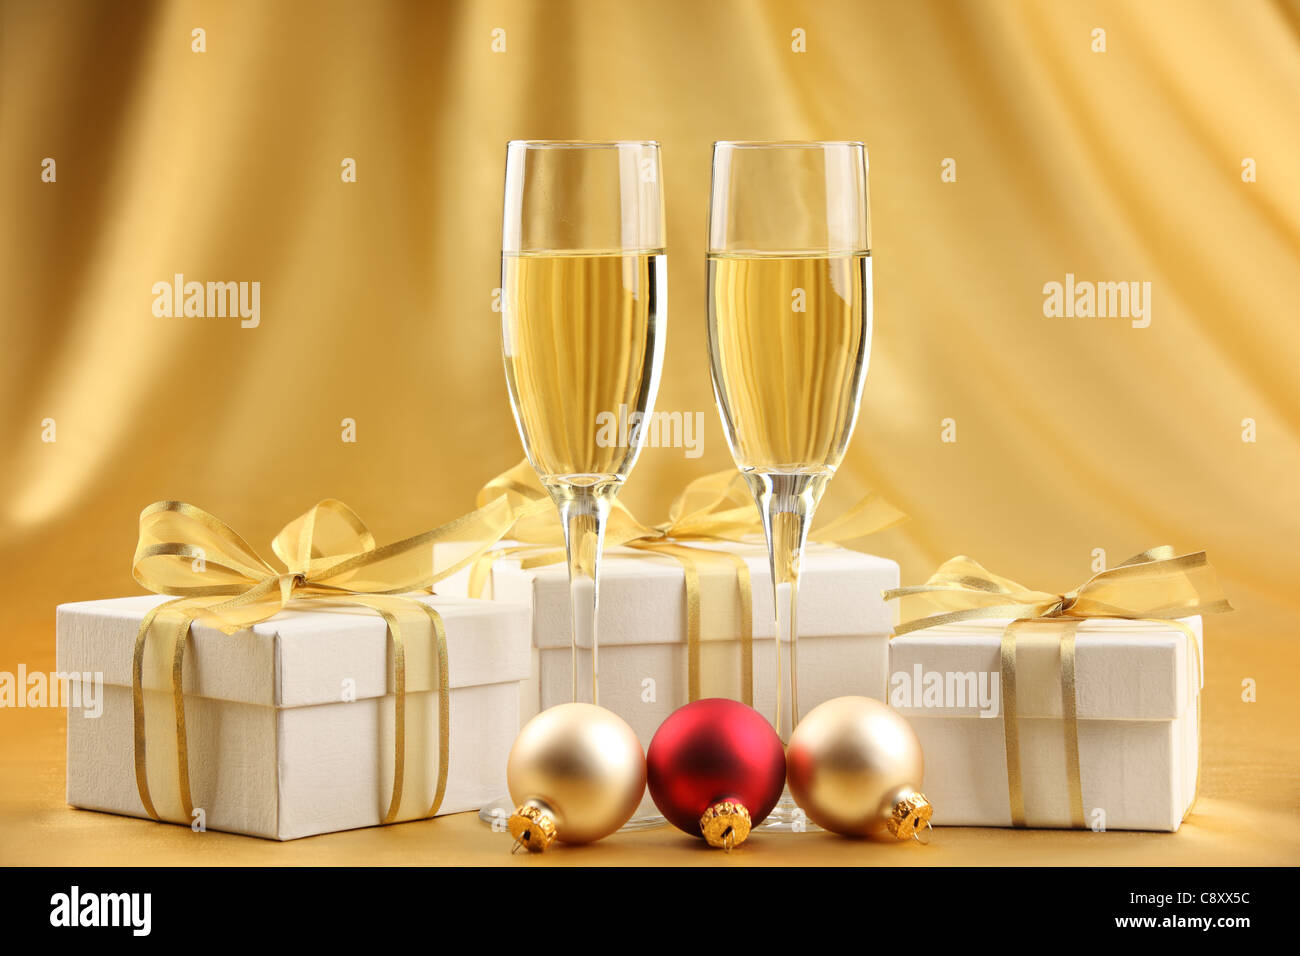 Glasses of champagne with gift boxes and Christmas balls. Stock Photo